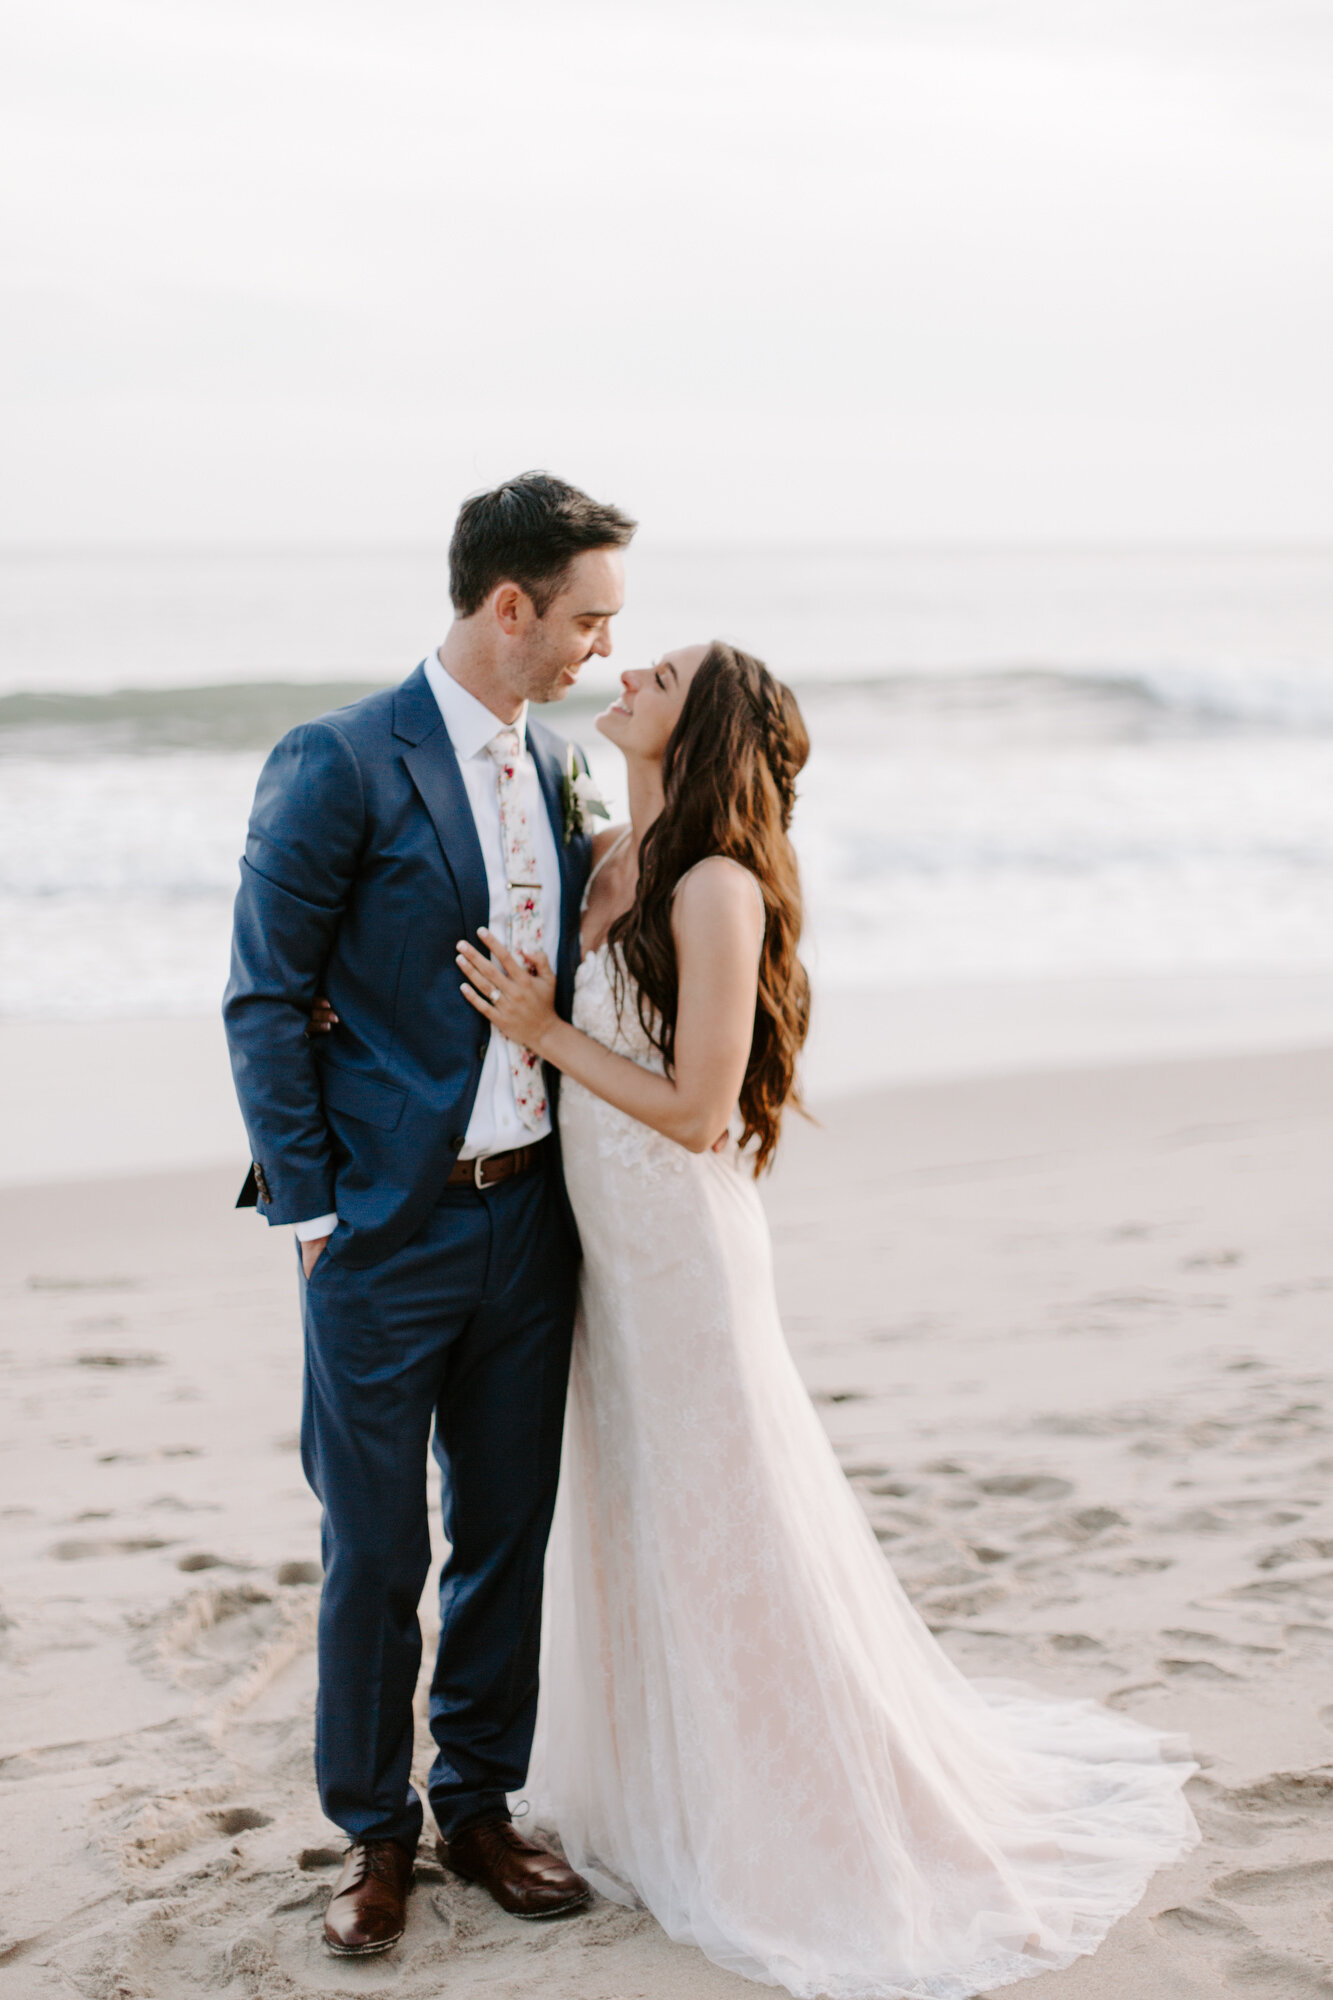 Malibu wedding photographed in Malibu california at a private home with a private beach.  Wedding photos were shot on the beach in Malibu.  This was a boho malibu wedding.  Malibu Wedding Photographer